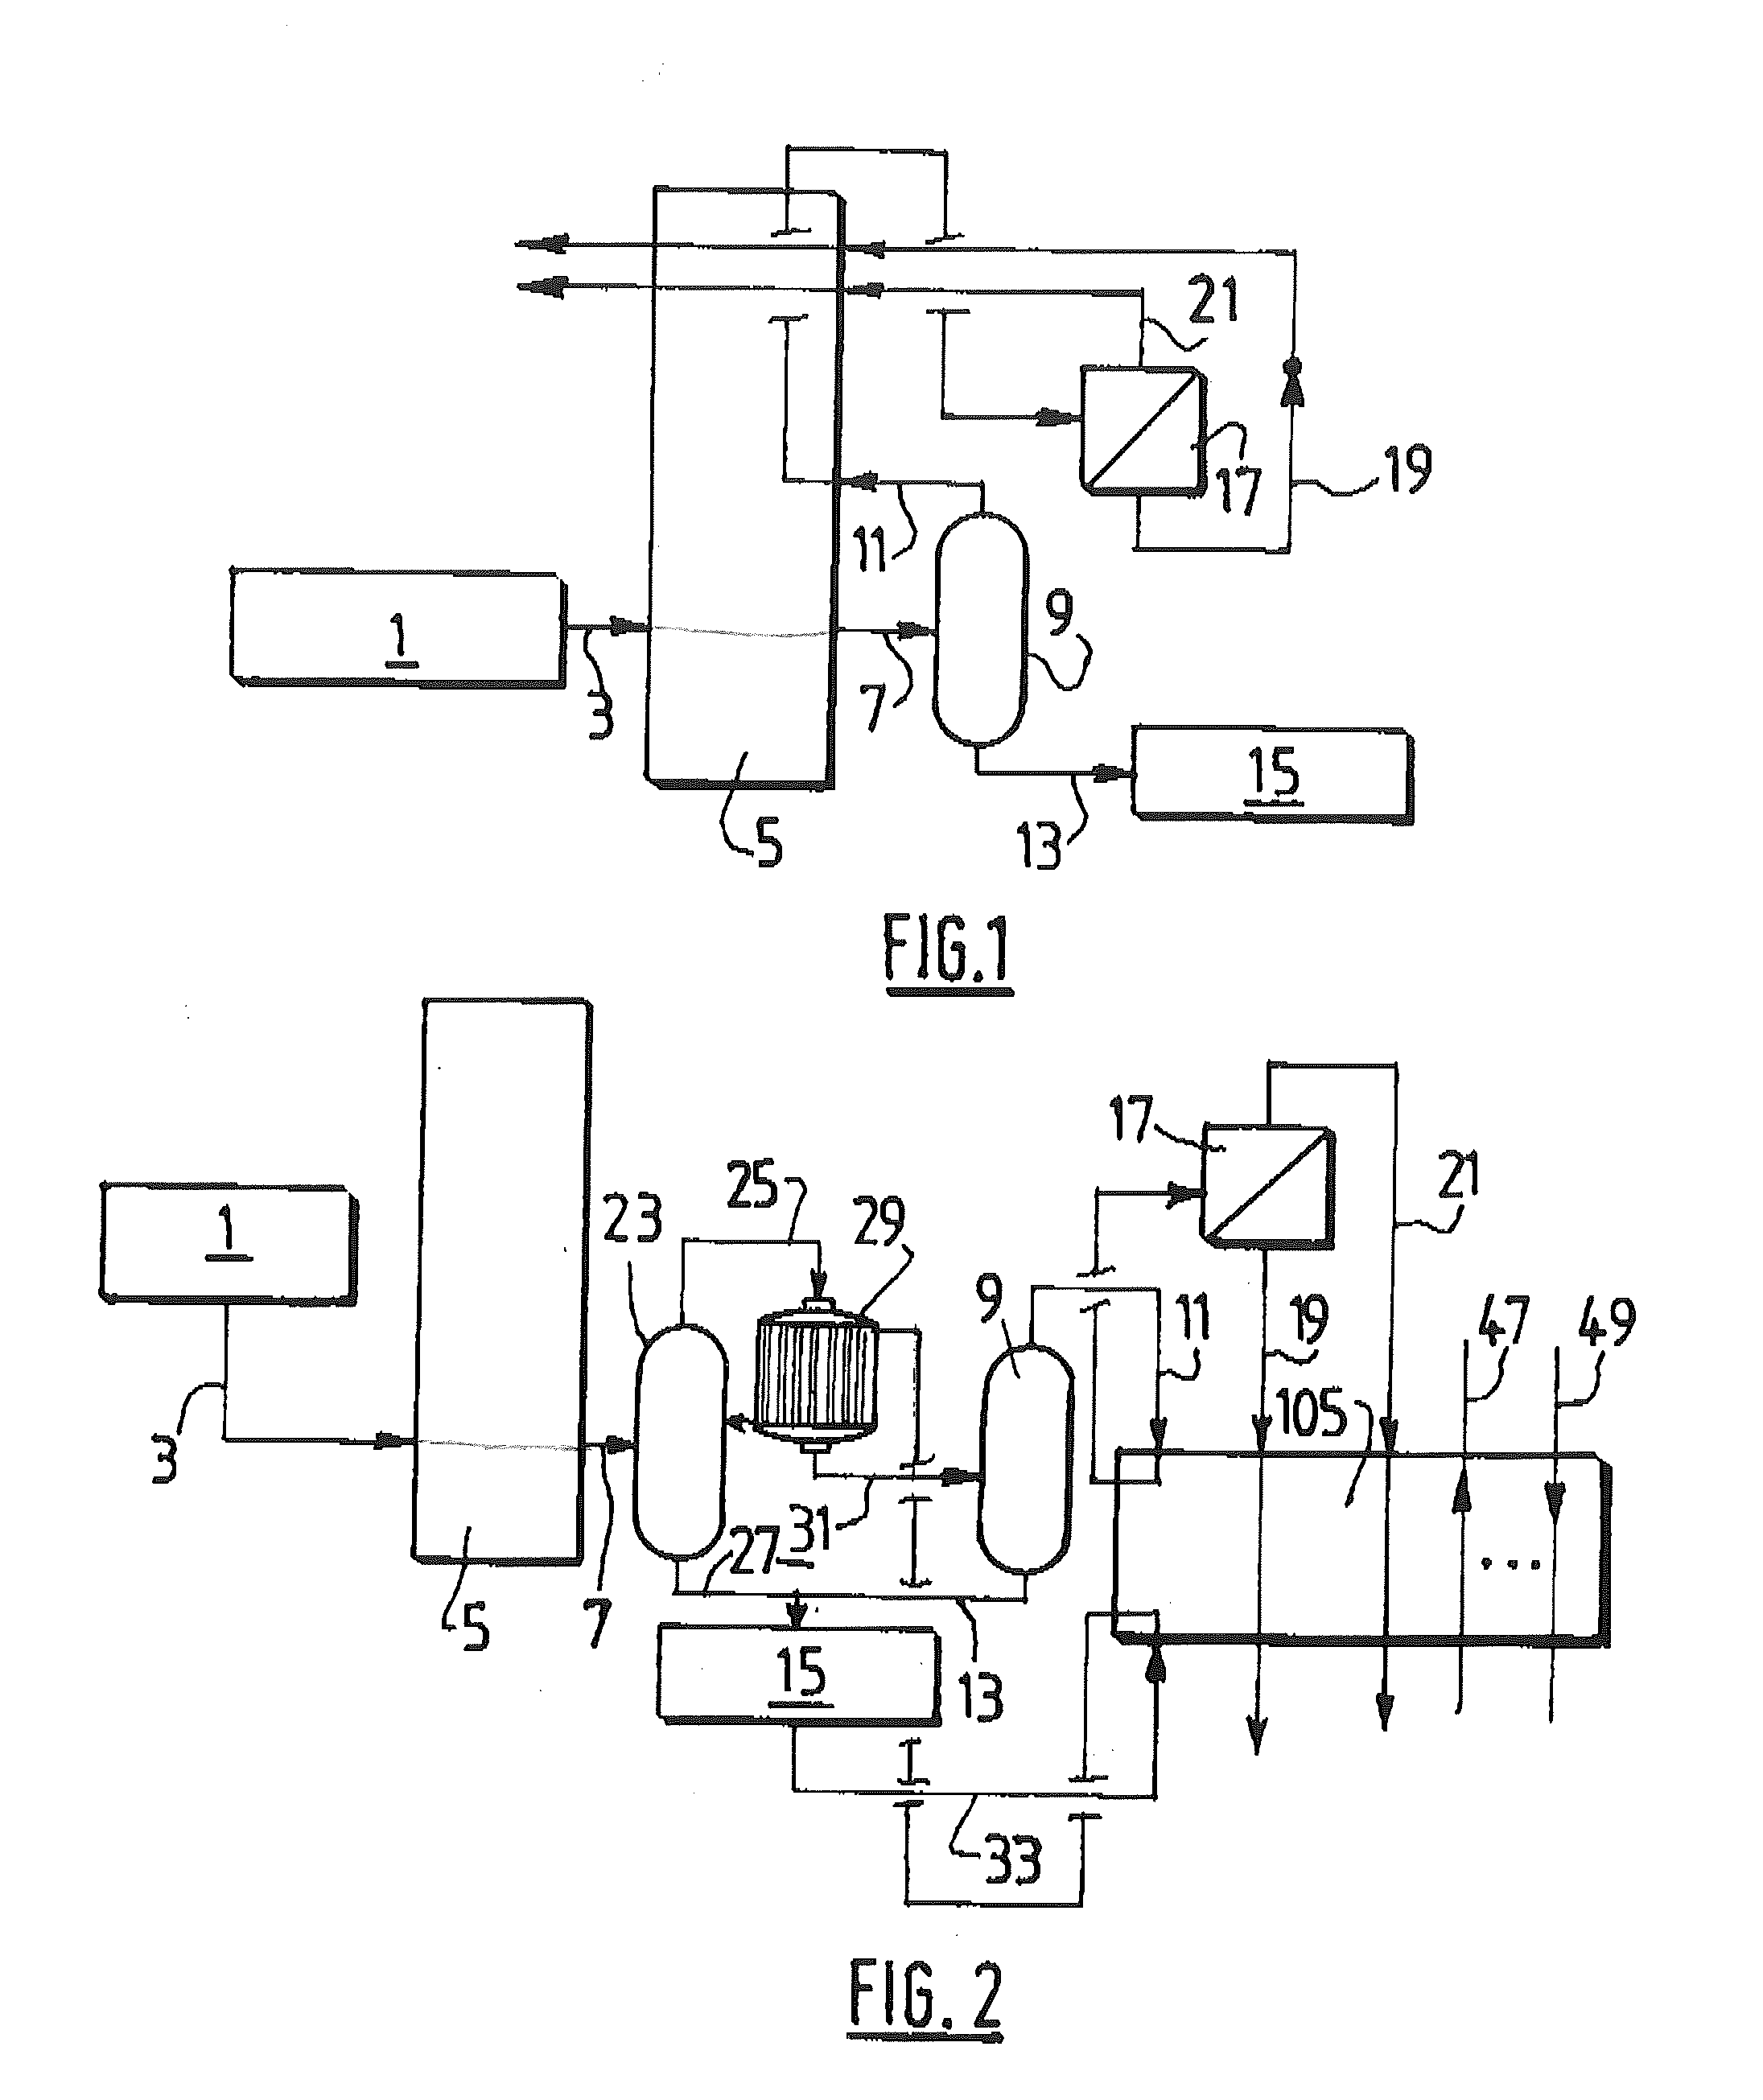 Method for Separating a Carbon Dioxide-rich Gas by Partial Condensation and Permeation